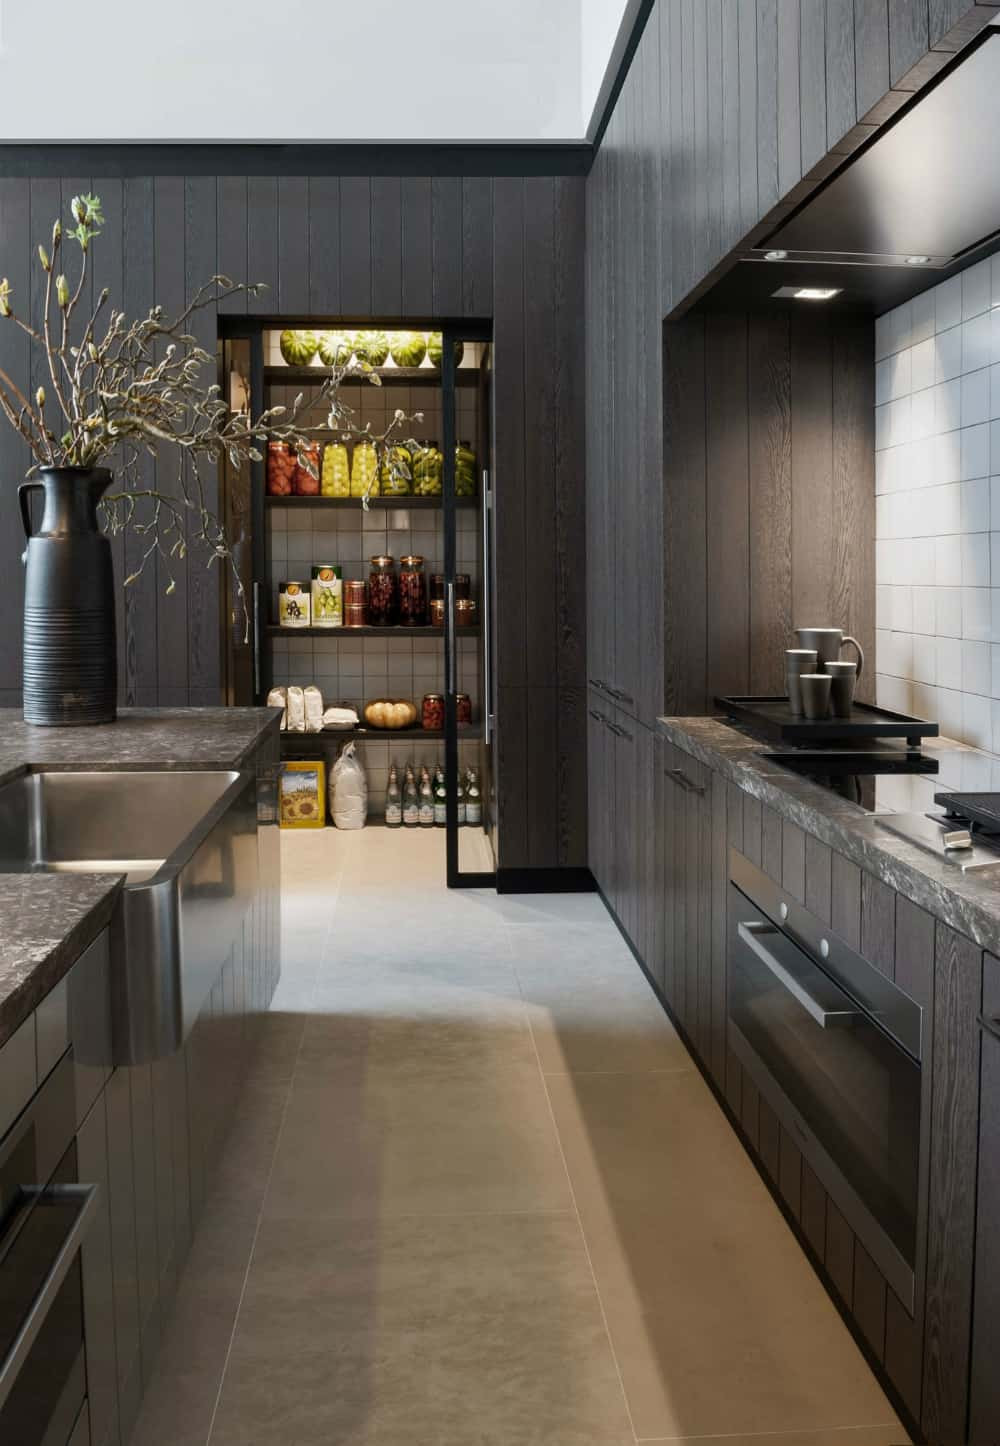 Kitchen Pantry Design Ideas
 Modern Pantry Ideas That are Stylish and Practical